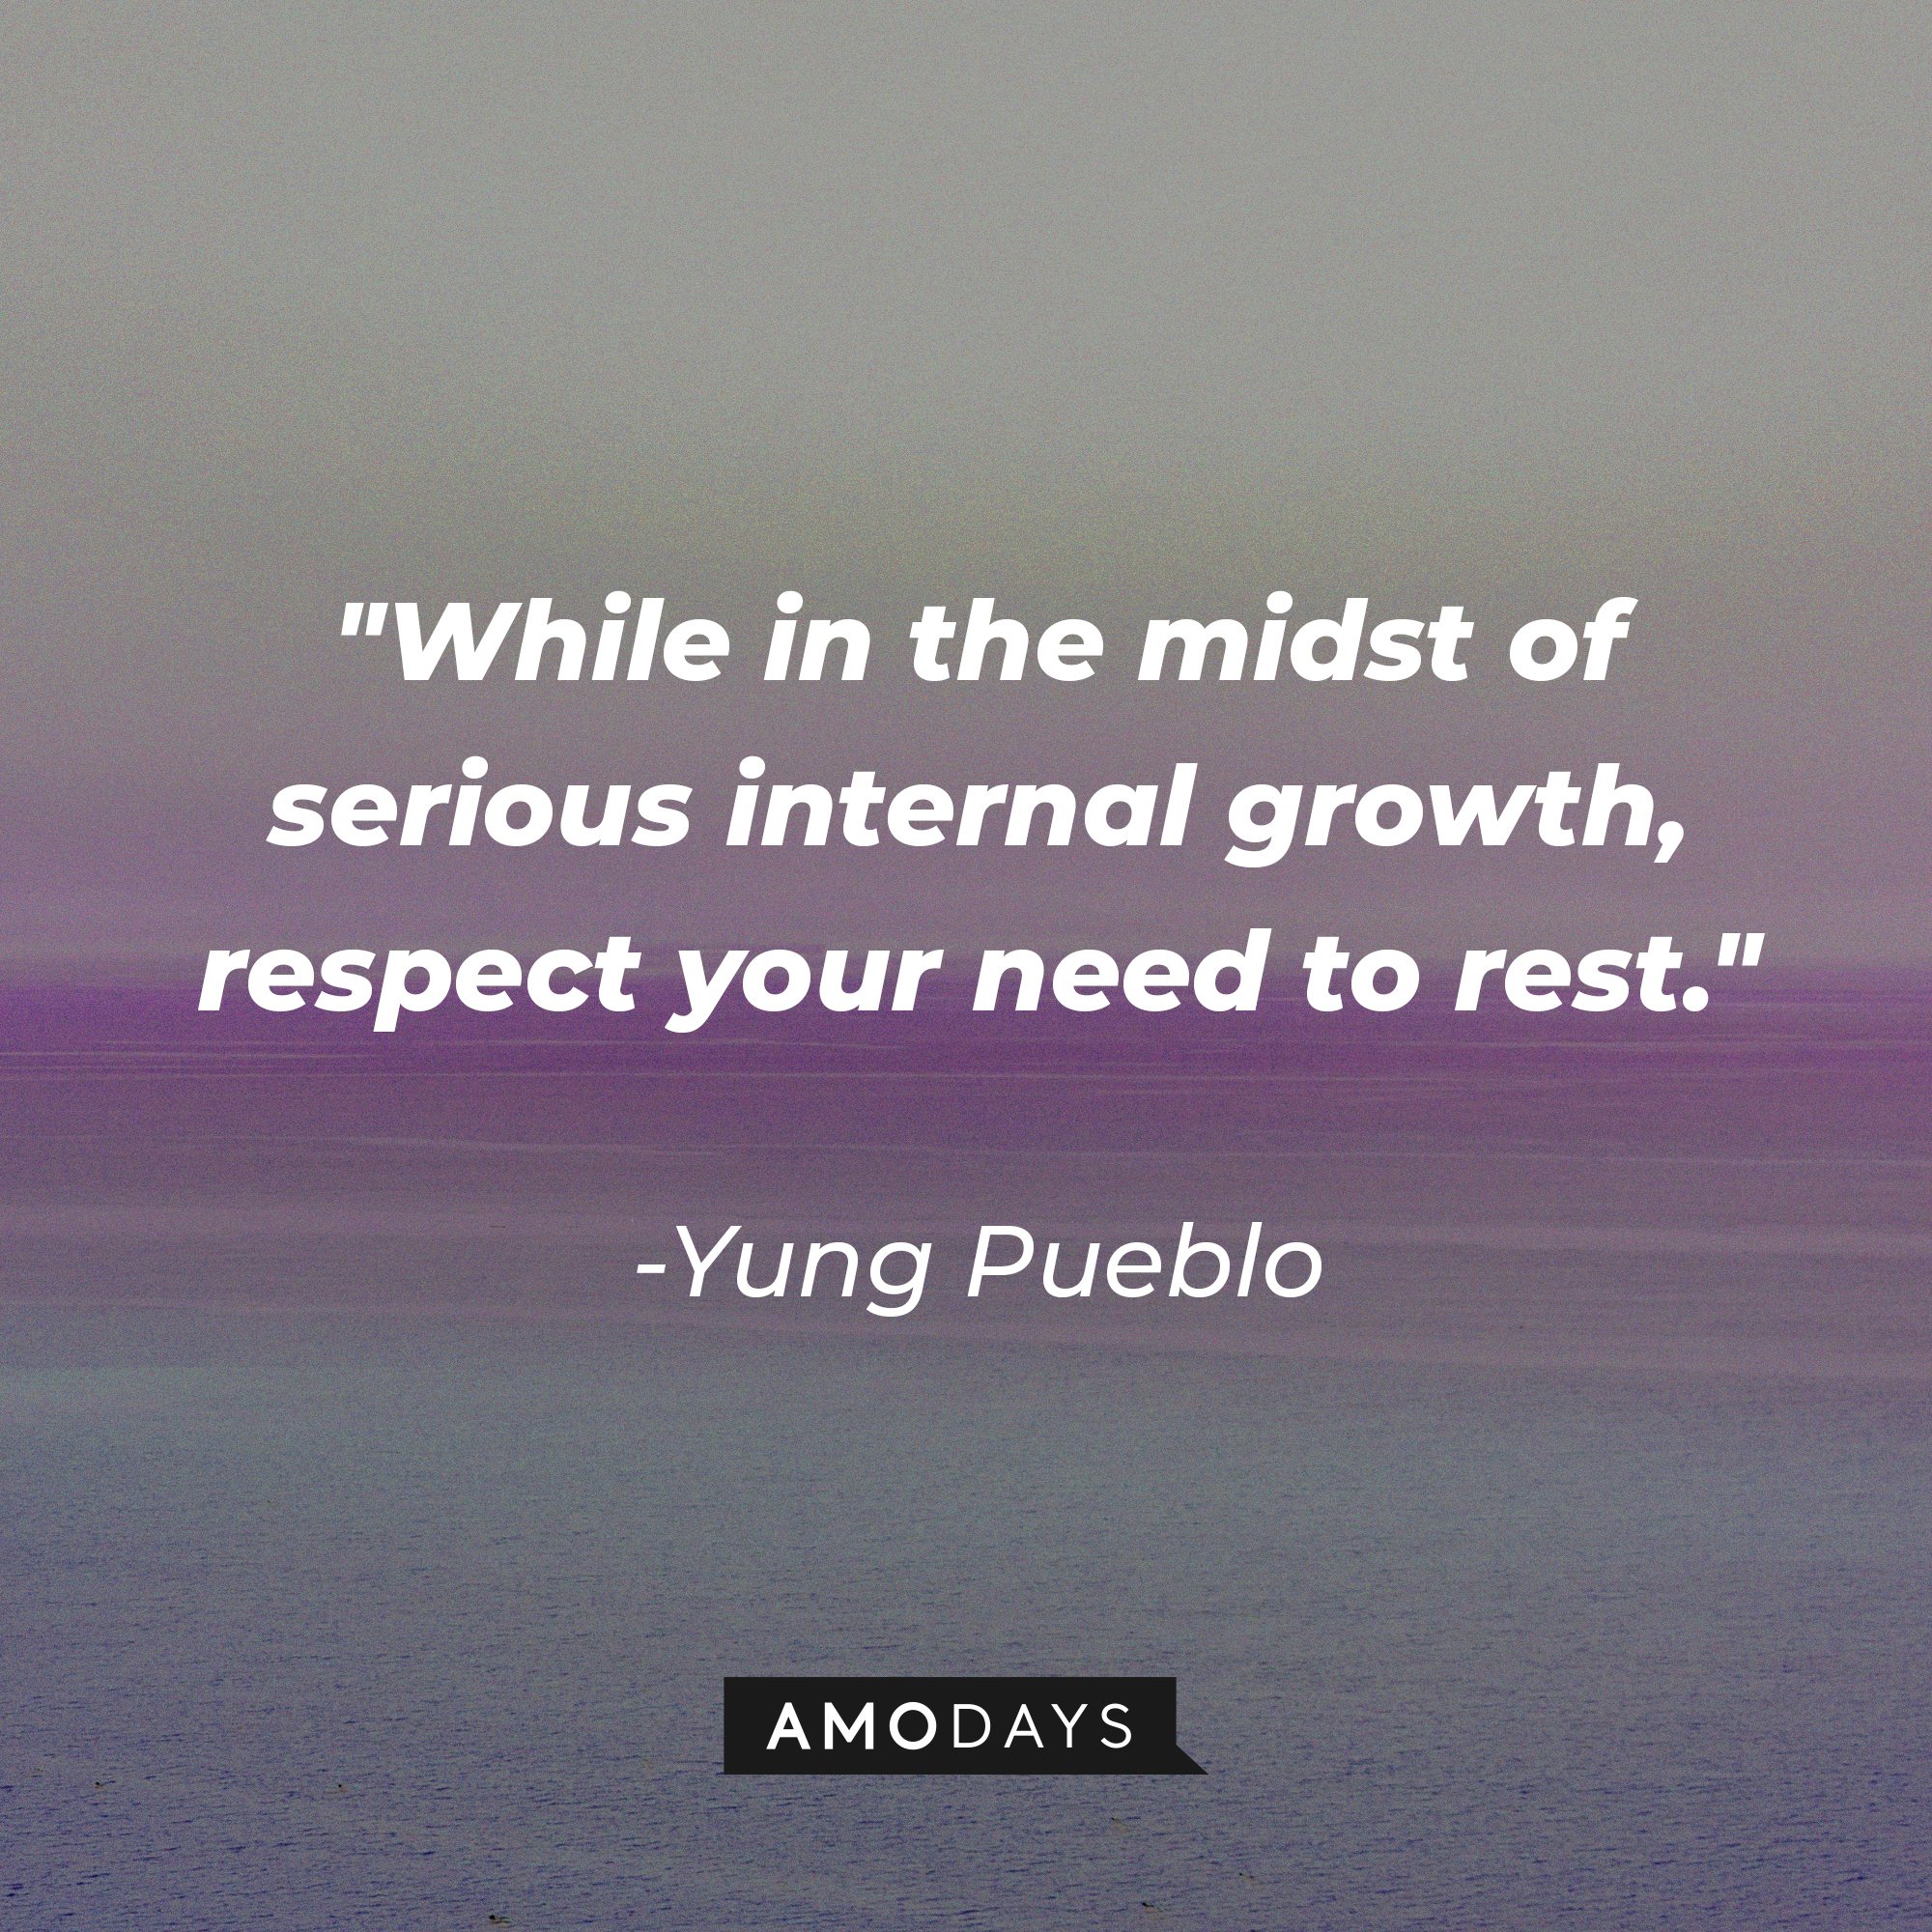 Yung Pueblo's quote "While in the midst of serious internal growth, respect your need to rest." | Source: Unsplash.com